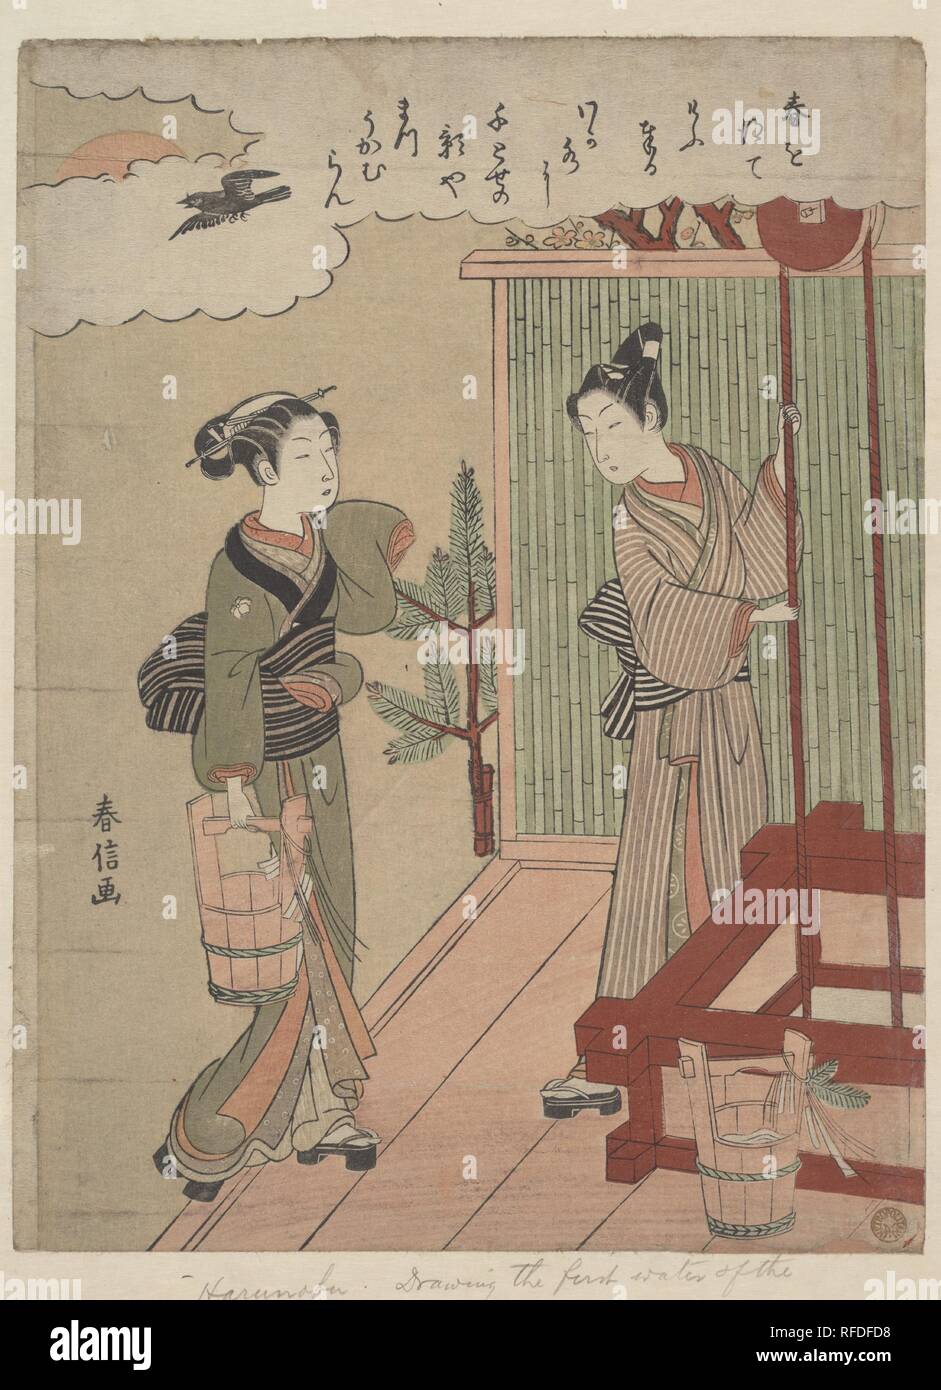 Drawing the First Water of the New Year. Artist: Suzuki Harunobu (Japanese, 1725-1770). Culture: Japan. Dimensions: 11 1/4 x 8 1/2 in. (28.6 x 21.6 cm). Date: ca. 1769-70.  Symbols of spring abound in this poem. A young couple draws the "first water of the New Year" (wakamizu) in decorated buckets; pine saplings sit by the doorway, and plum blossoms burst into bloom. The scene also calls to mind an episode from the tenth-century Tales of Ise (Ise monogatari) known as the "Well curb," in which young lovers recall measuring their heights by the well as children. It reads  Haru o hete    kyo tate Stock Photo